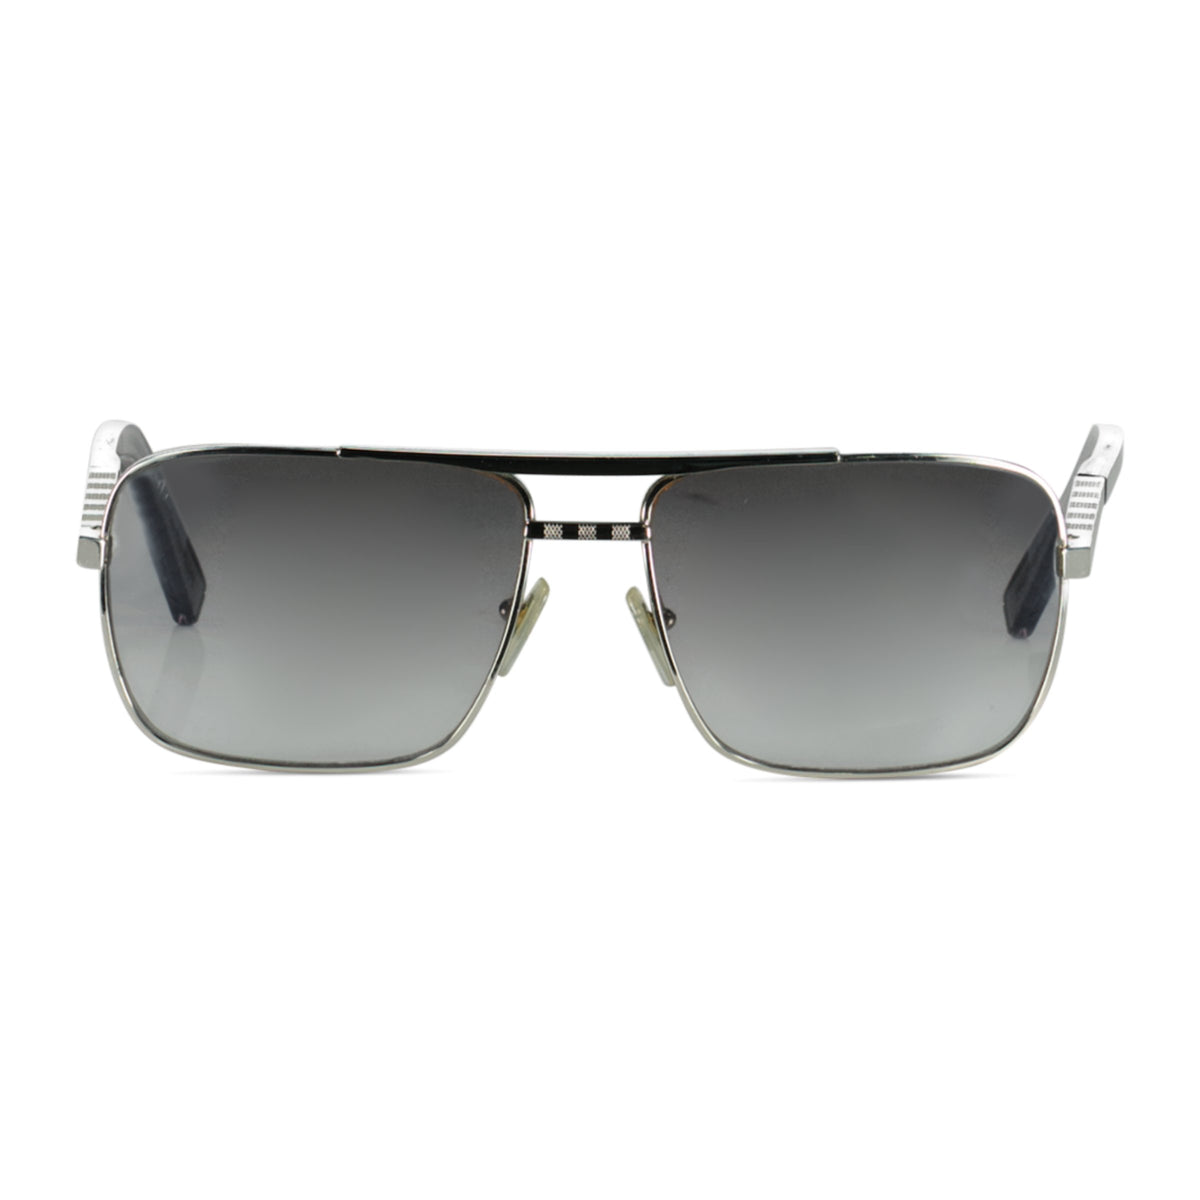 LOUIS VUITTON ATTITUDE SUNGLASSES | affluentarchives - Used Designer Clothing Outlet Under RRP